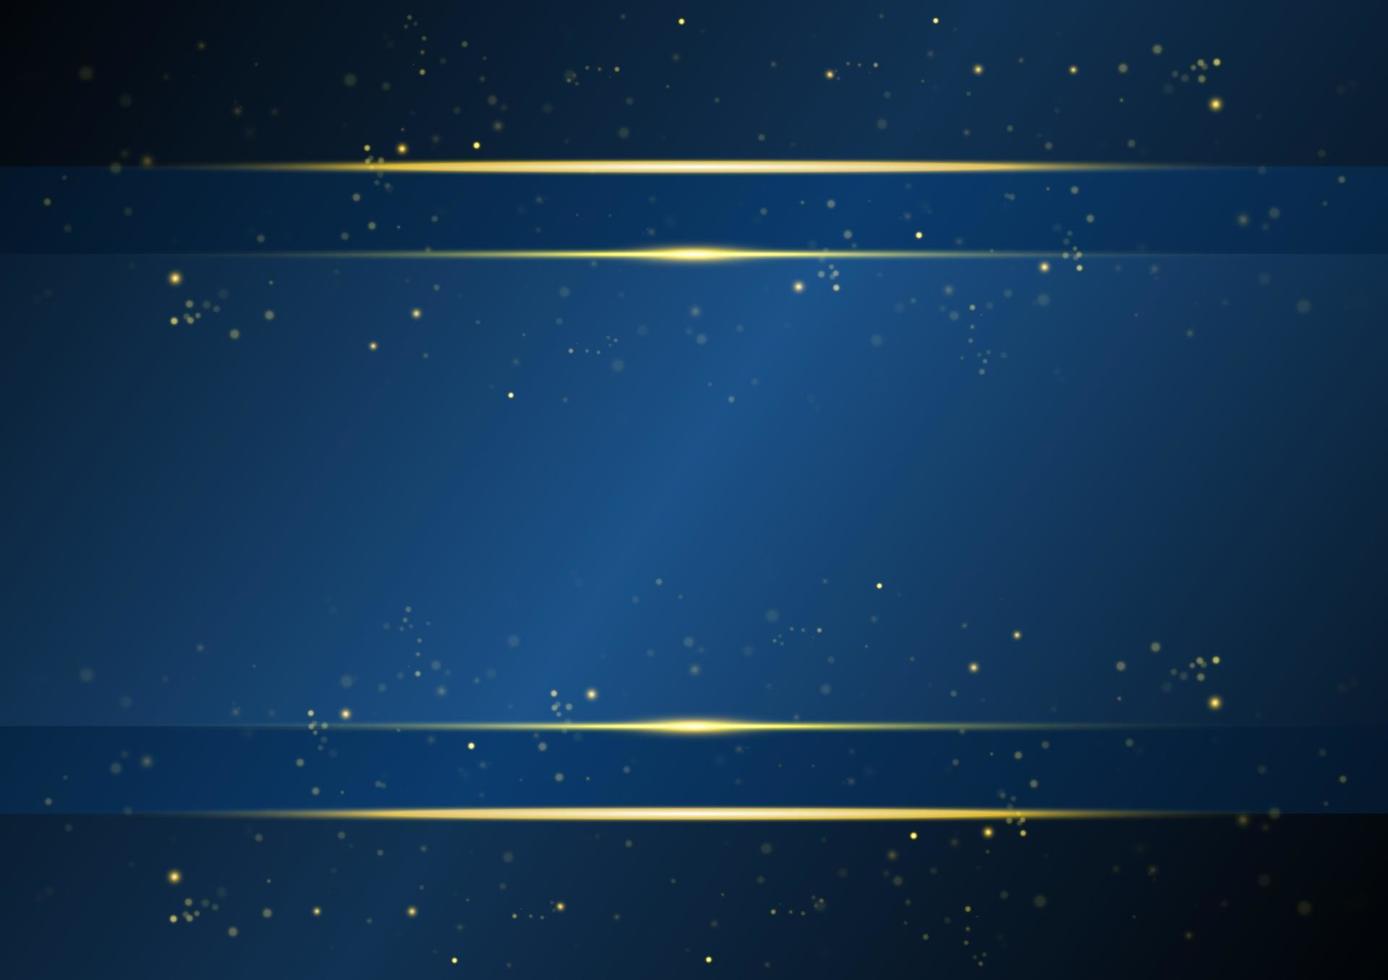 Elegant blue rectangular frame with text space and gold glitter with shiny gold lines on dark blue background vector